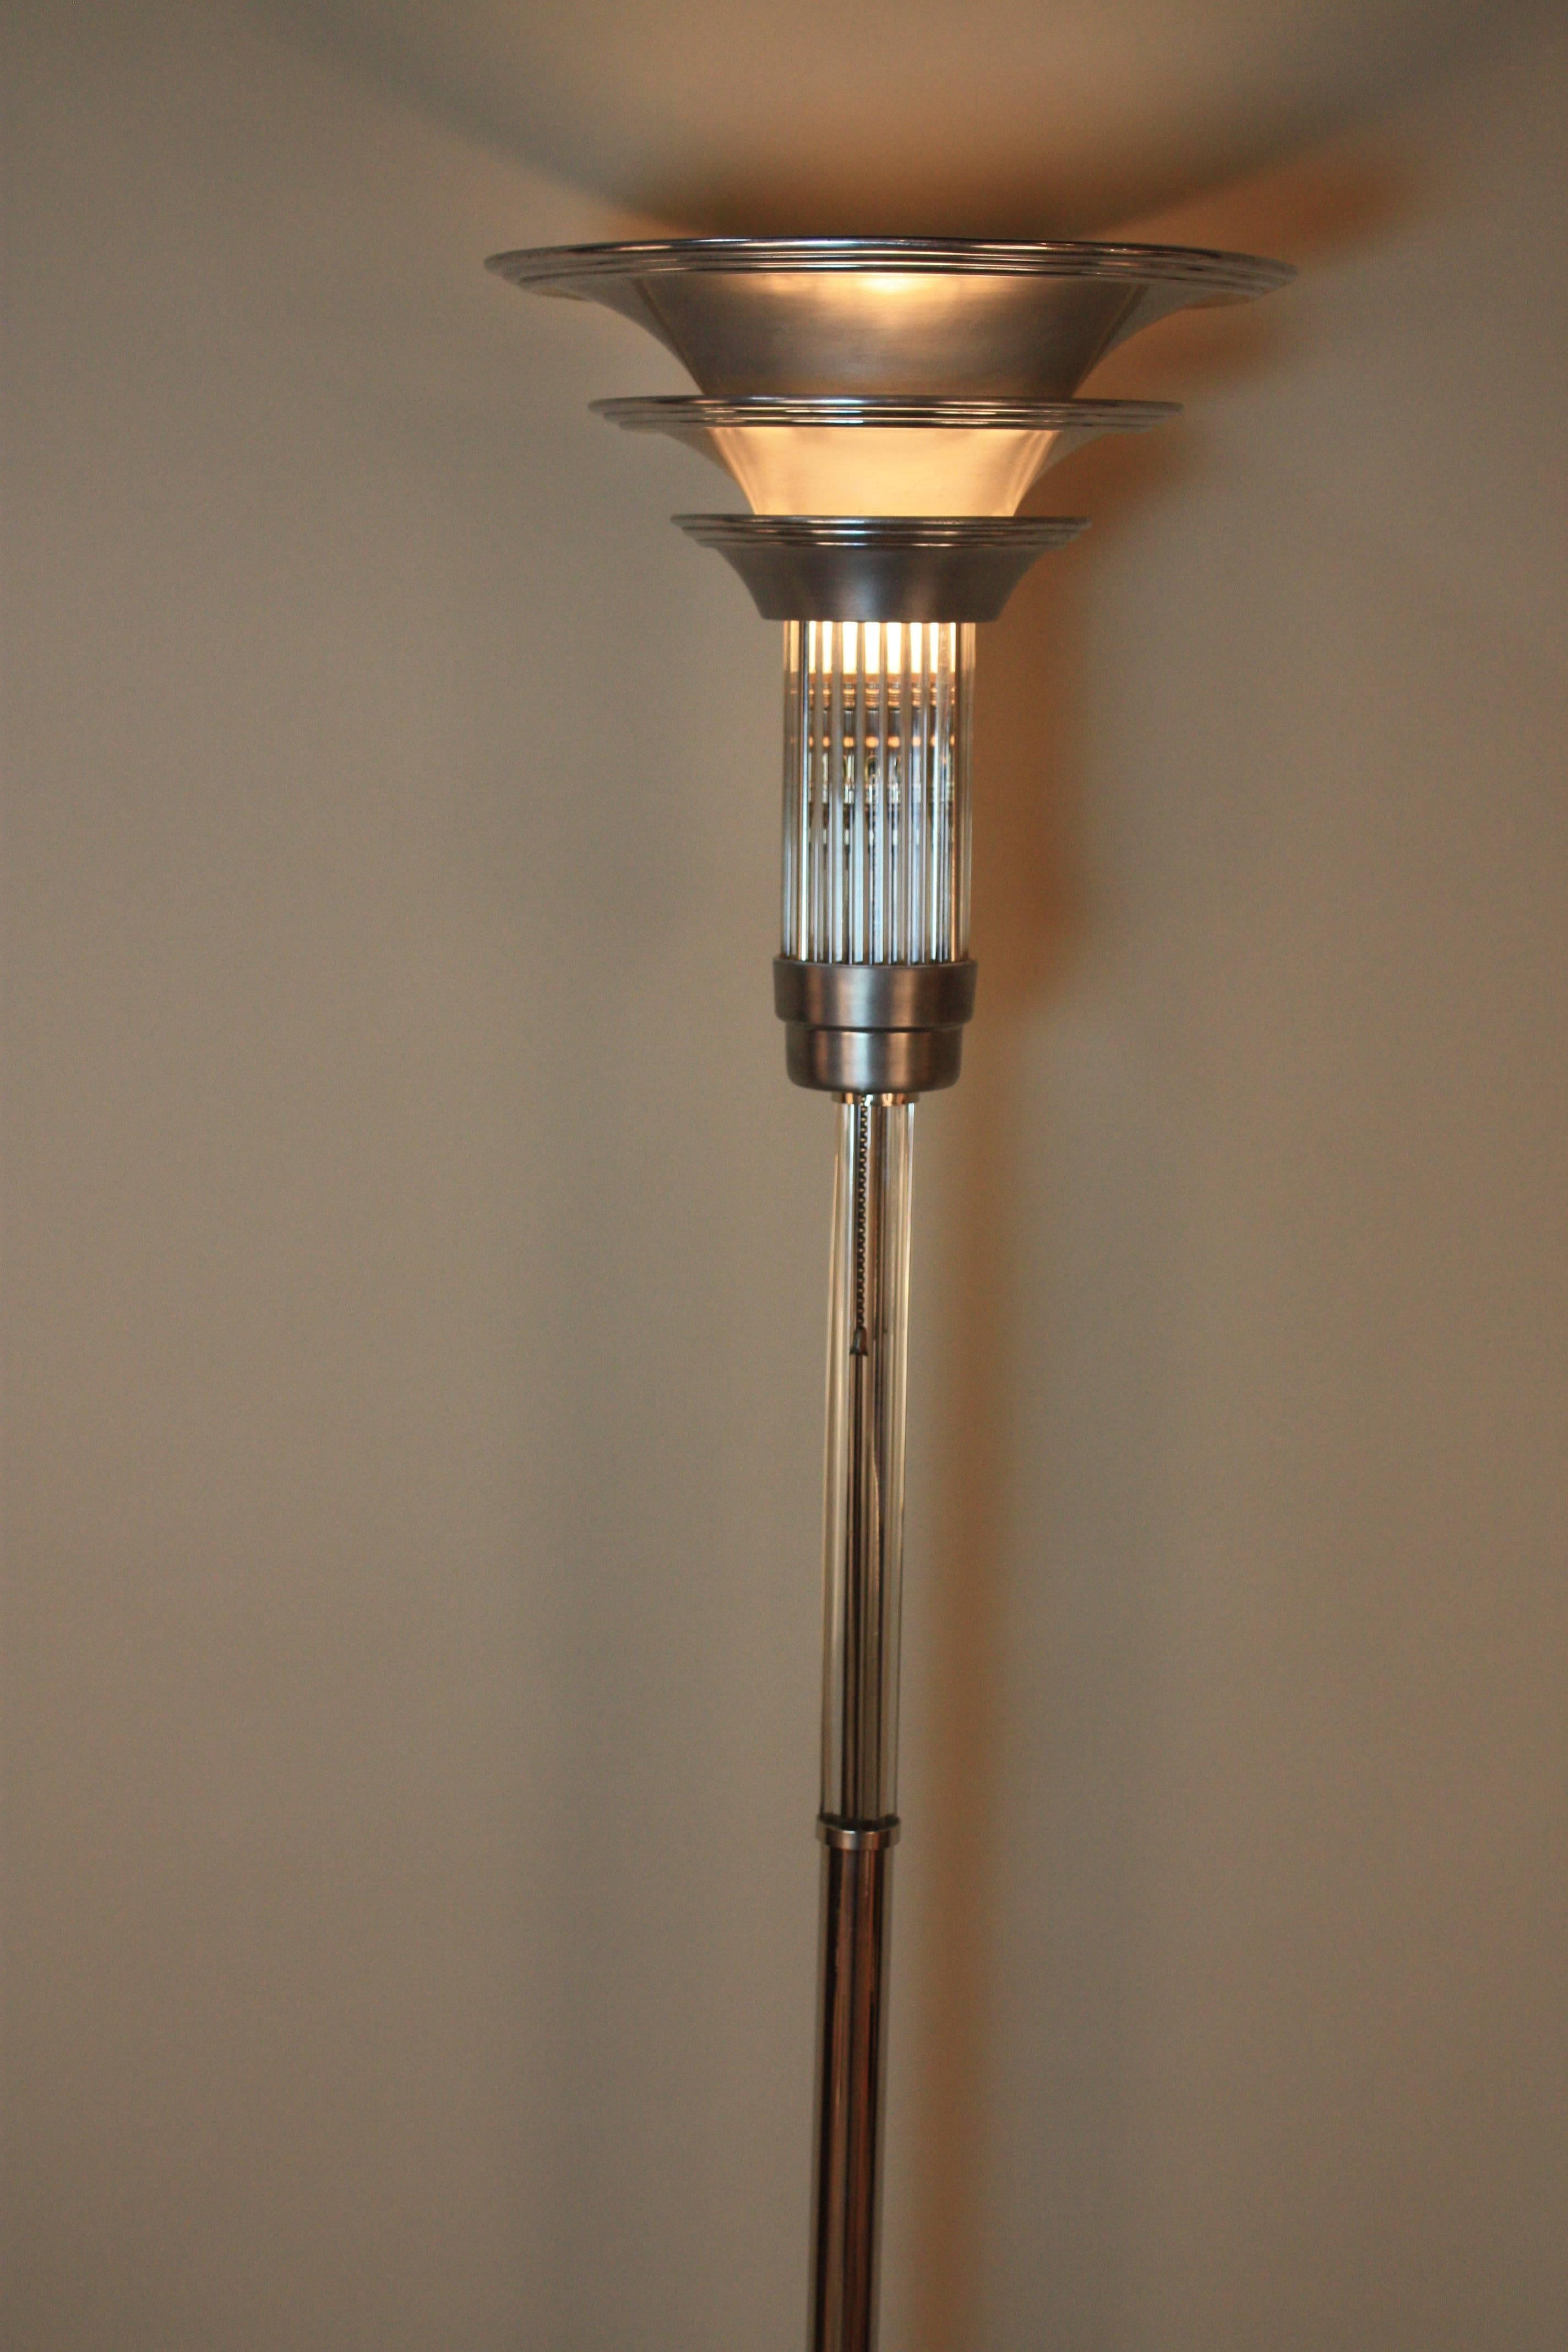 A stunning and rare 1930s American Art Deco torchiere floor lamp. A round nick base, nickel and glass center column with aluminium cup that holding glass rods with a triple shade polished and brushed aluminium.